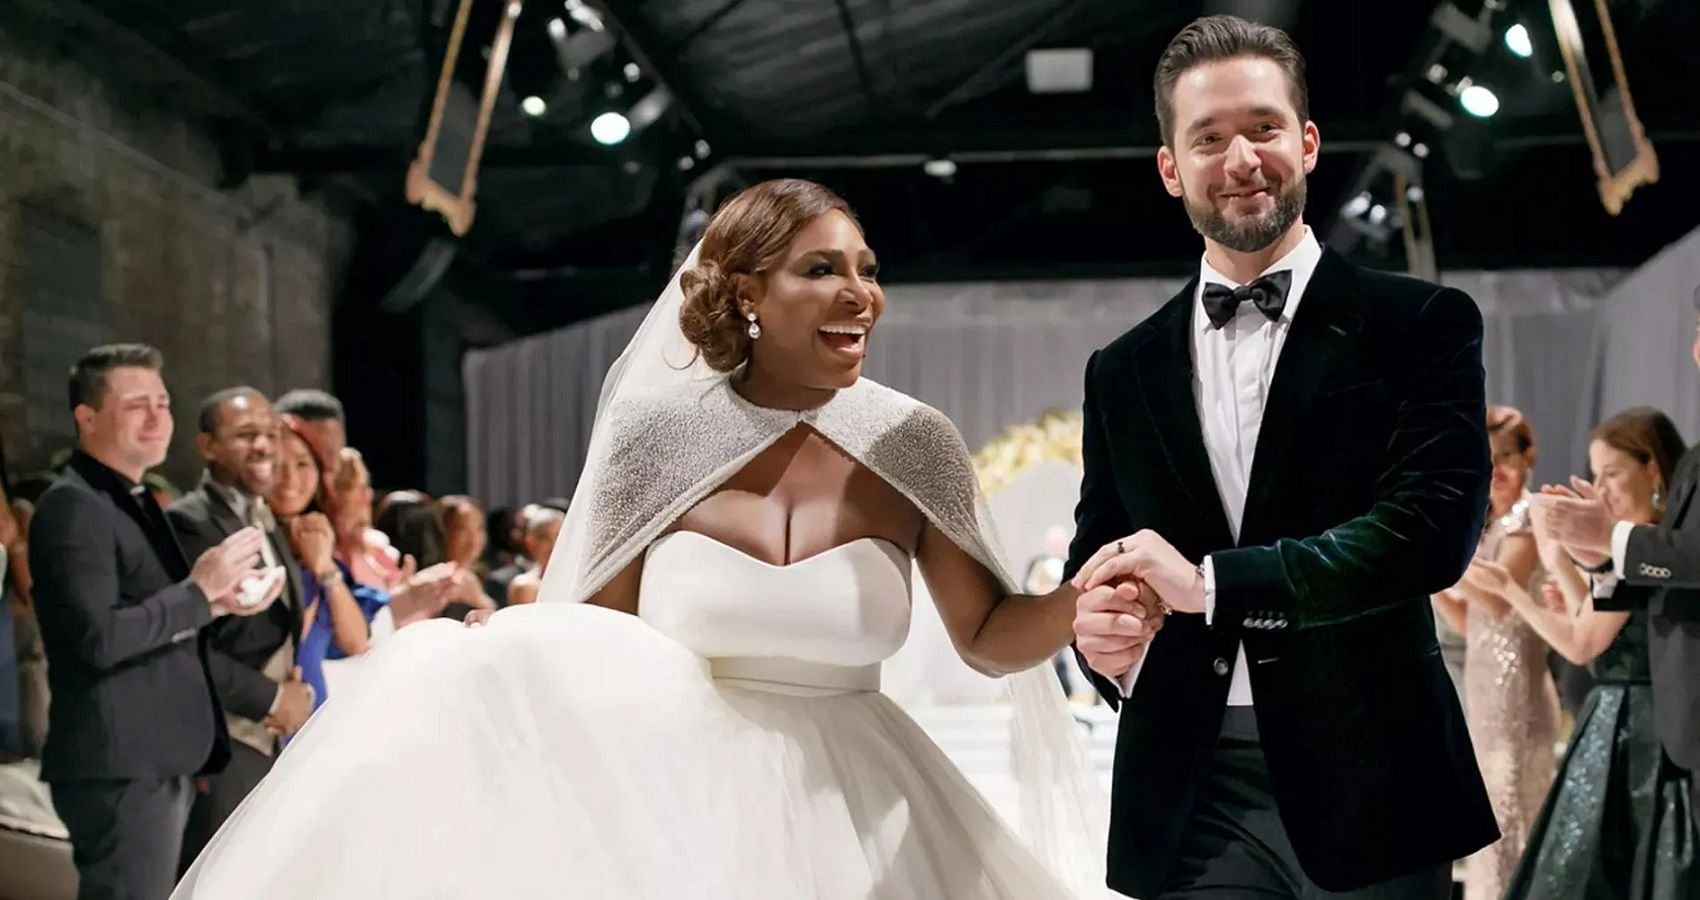 Did Serena Williams' Husband Catch Her Eye By Being Really Creepy?